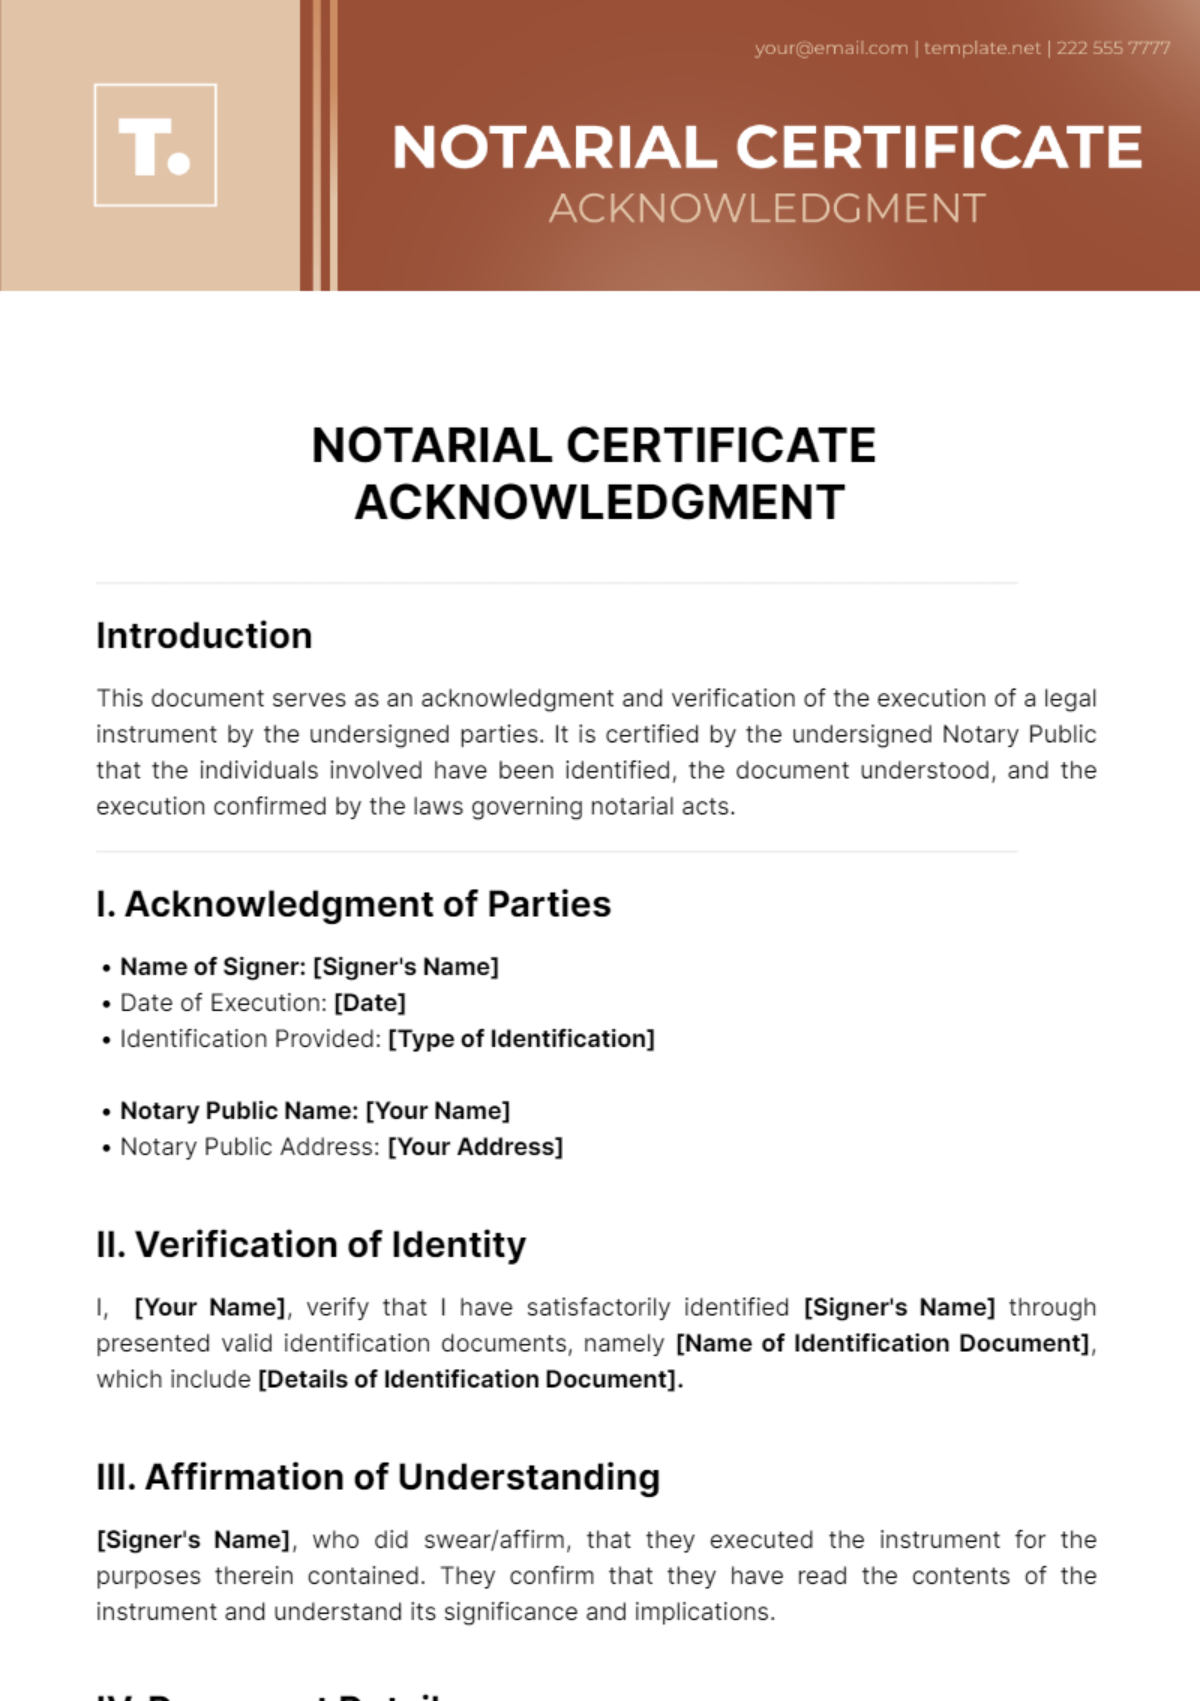 Notarial Certificate Acknowledgment Template